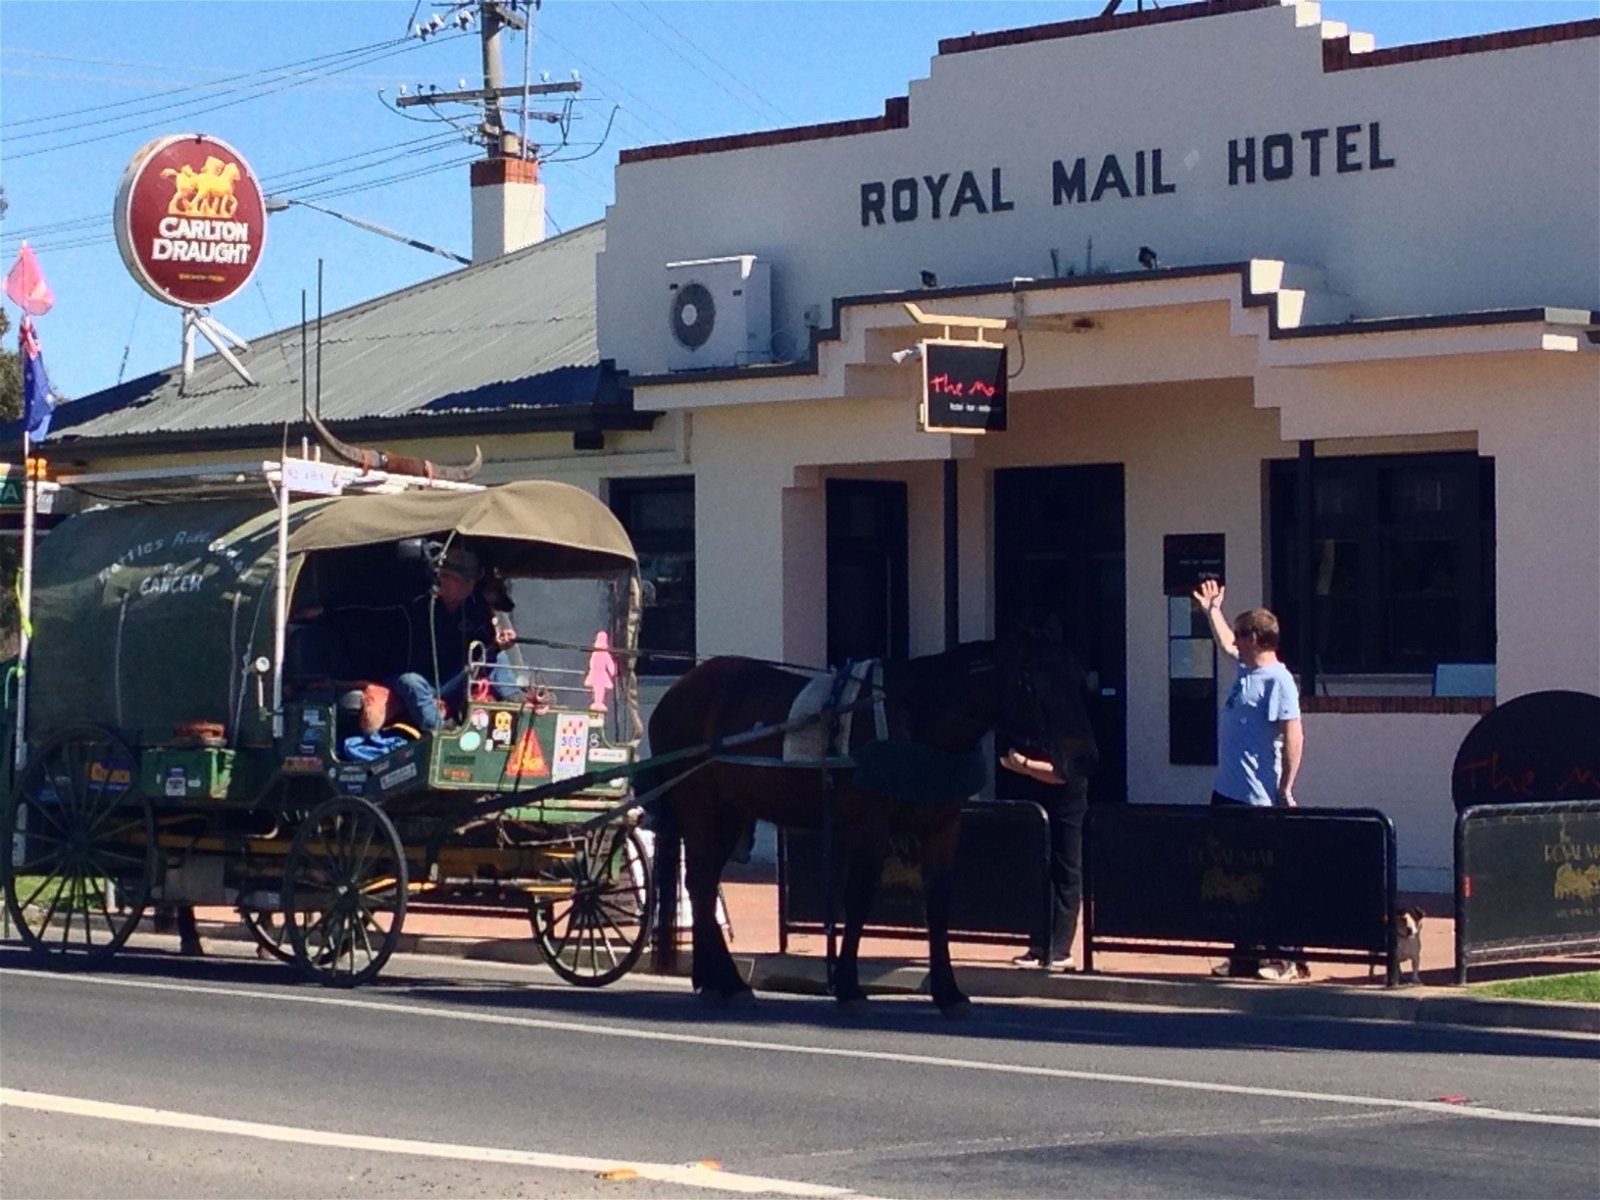 Royal Mail Hotel Mulwala - Food Delivery Shop